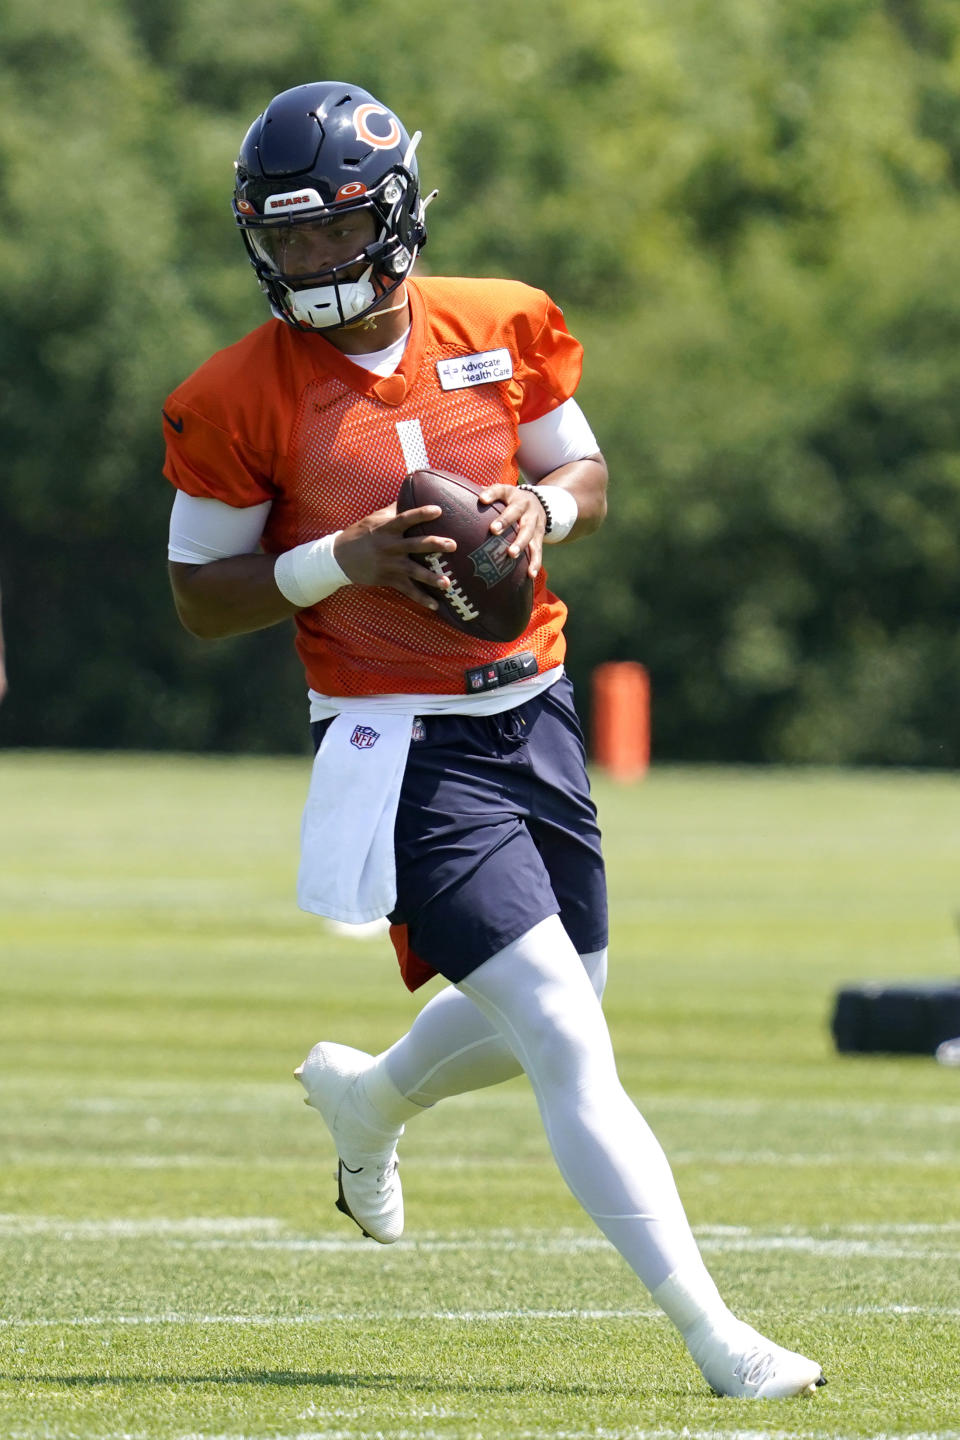 Chicago Bears quarterback Justin Fields runs with a ball during NFL football practice in Lake Forest, Ill., Wednesday, June 9, 2021. (AP Photo/Nam Y. Huh)